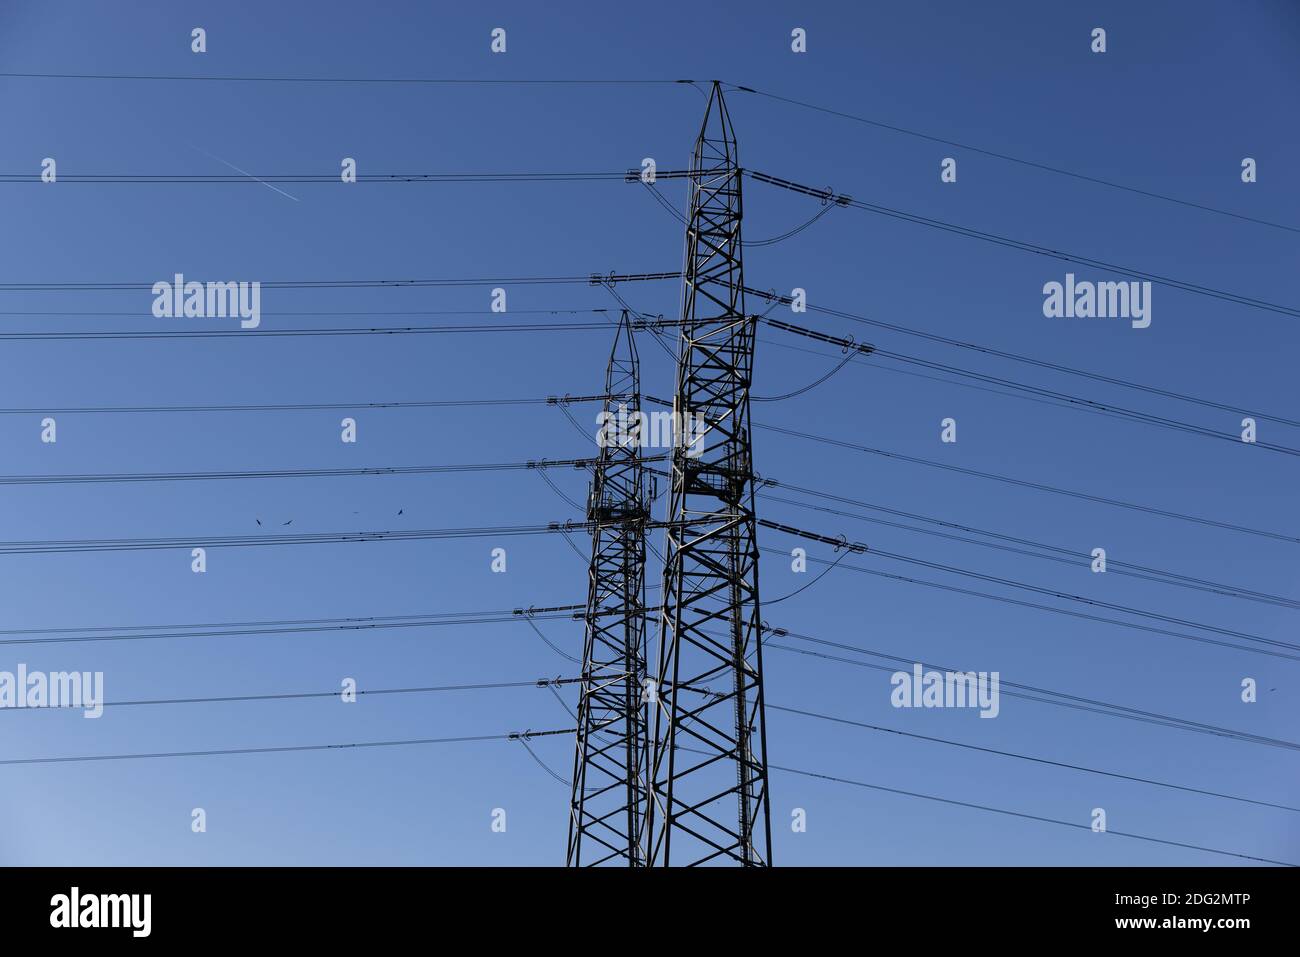 double steel high-voltage pylon in front of a blue sky and flying birds in the background, electricity supplies vital energy Stock Photo